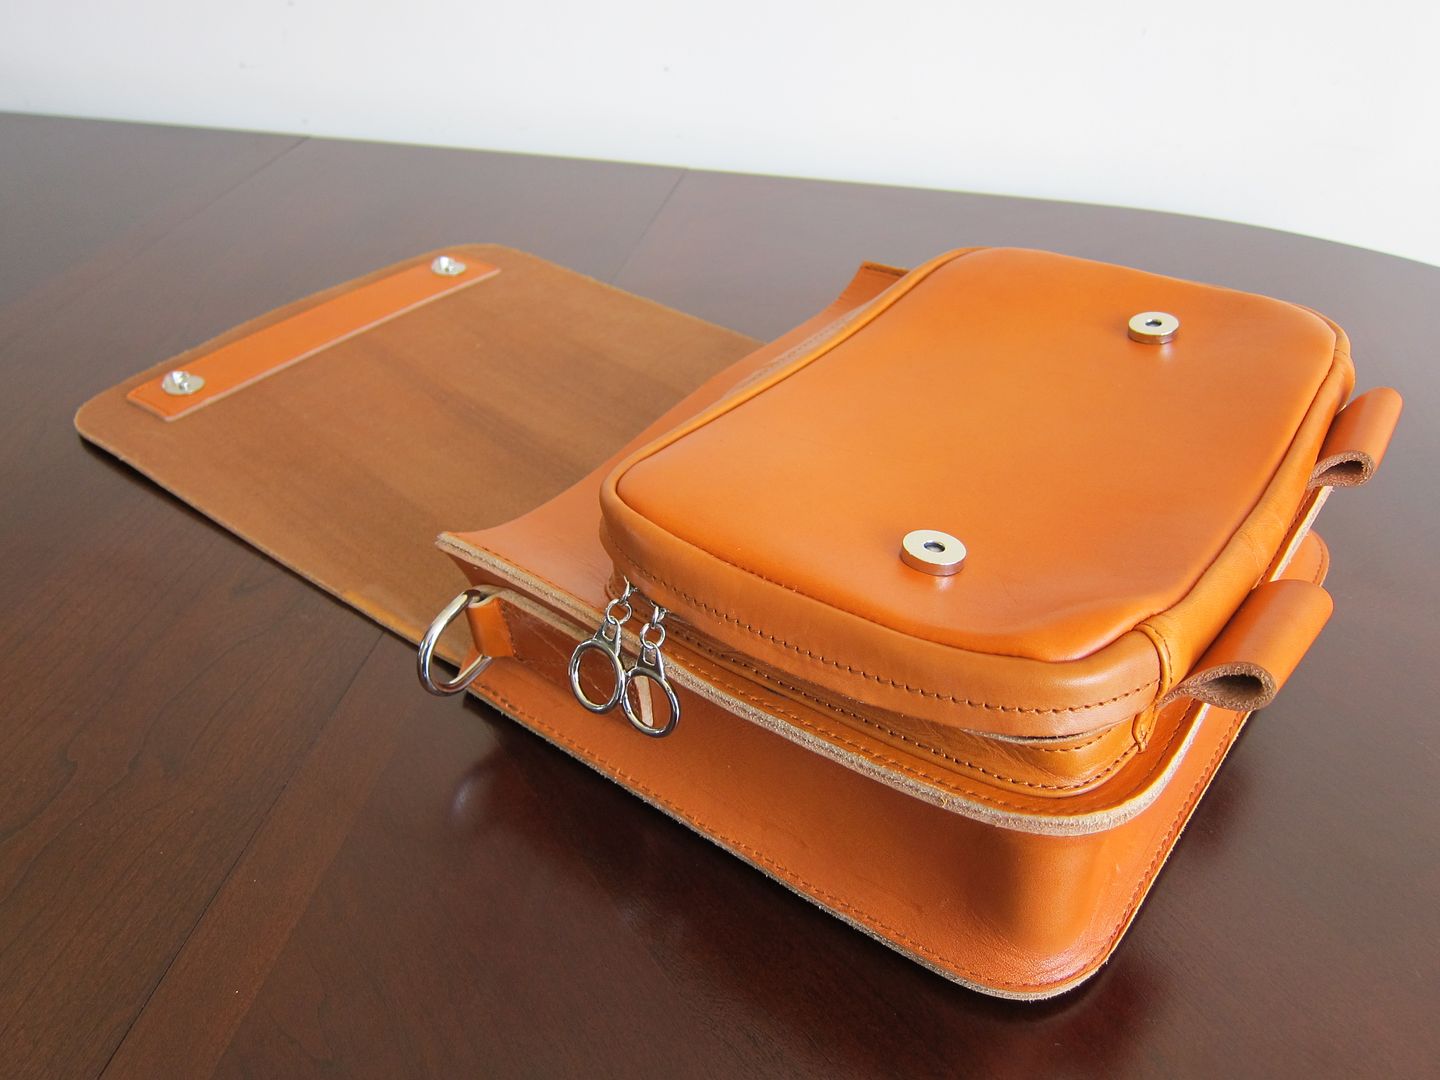 Two23 Leather Netbook Messenger Bag